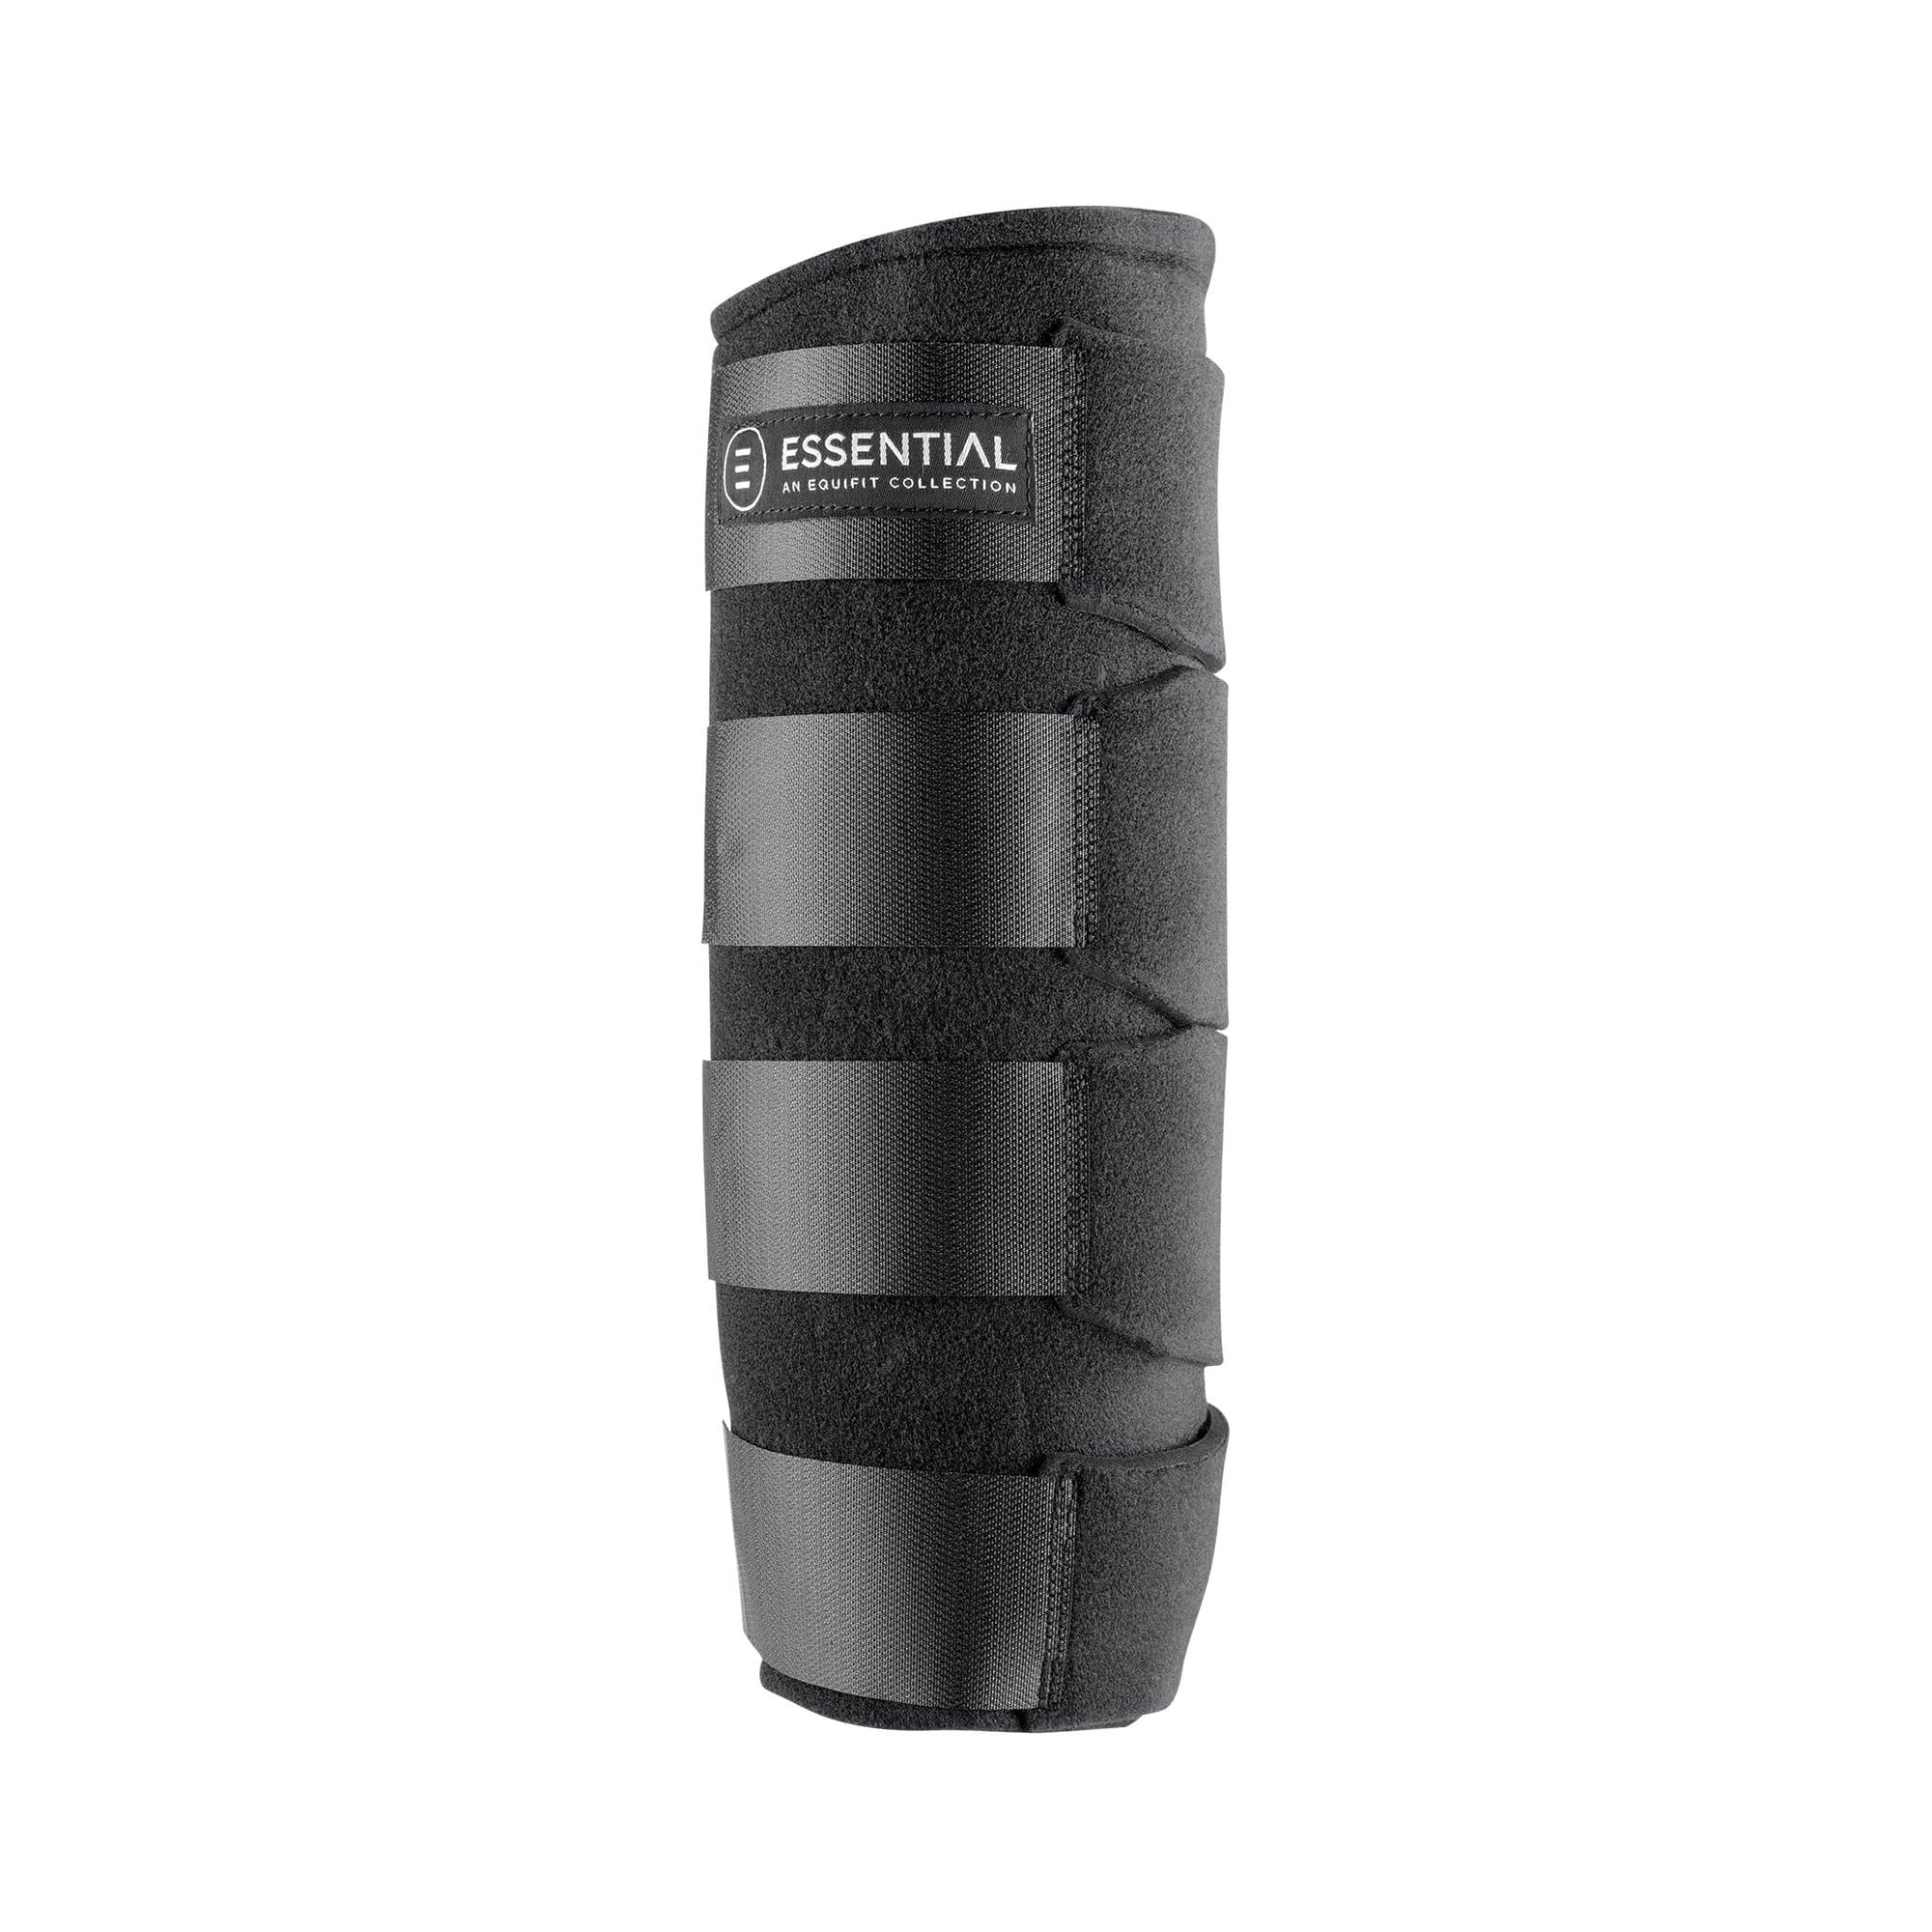 The Essential Cold Therapy Tendon Boot provides cold therapy down to the ankle in one easy boot.